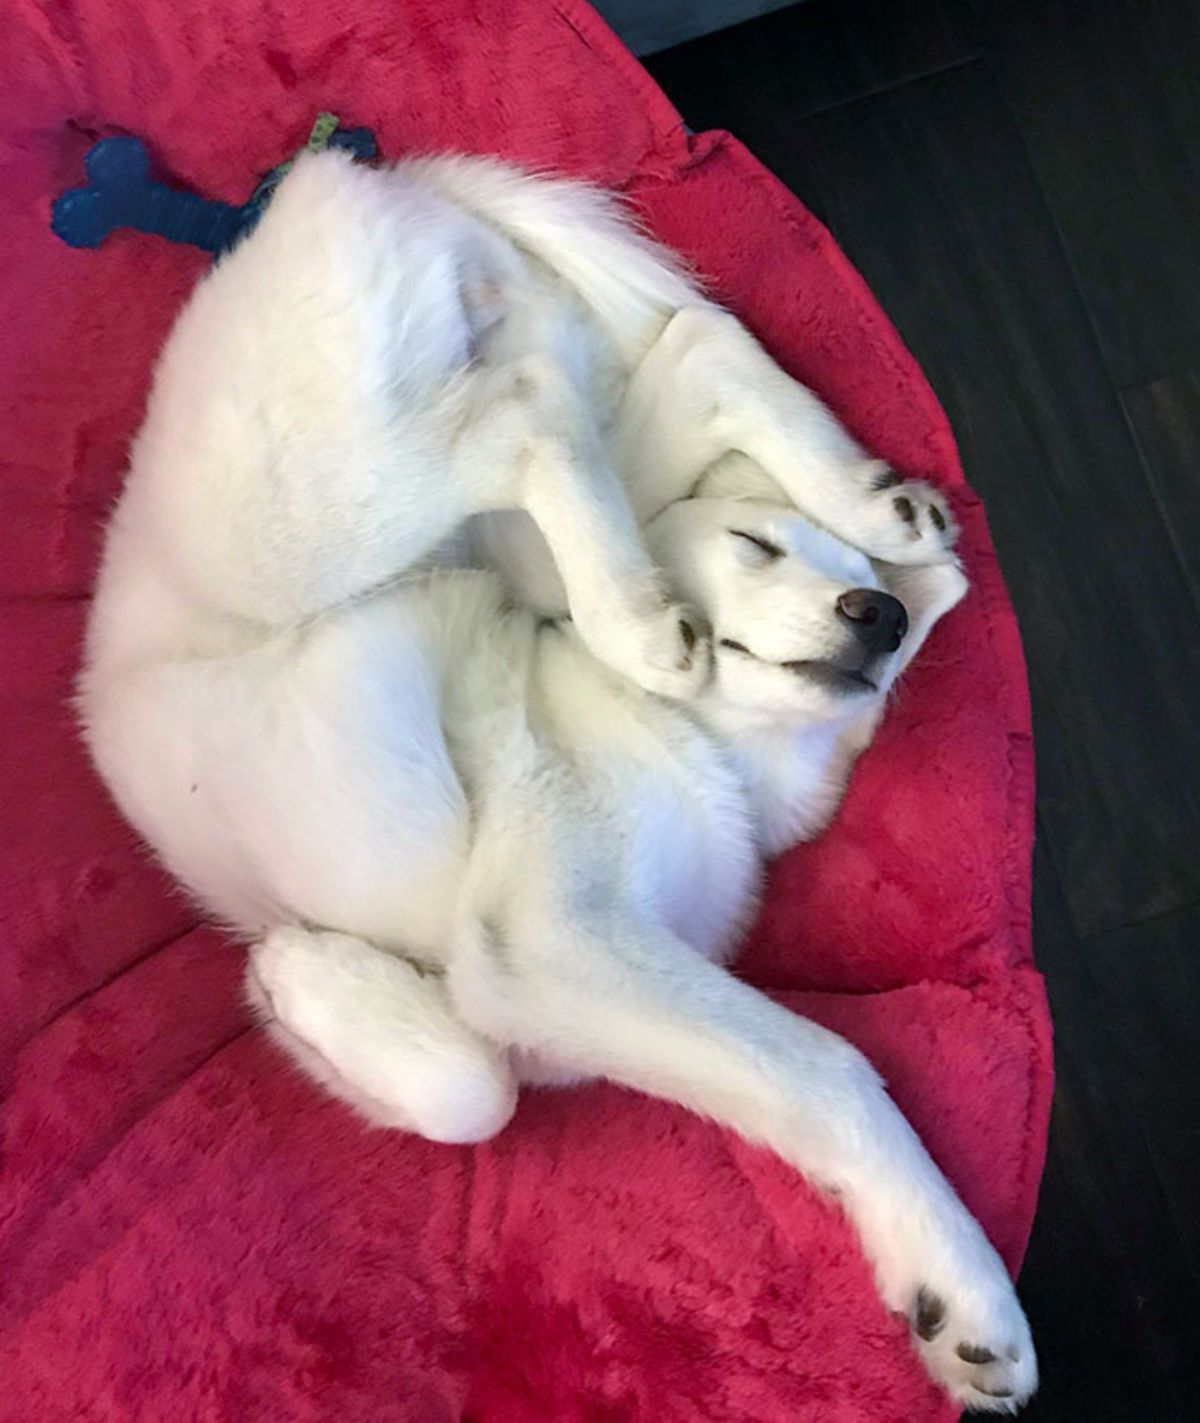 white dog sleeping in a contorted position on a red dog bed